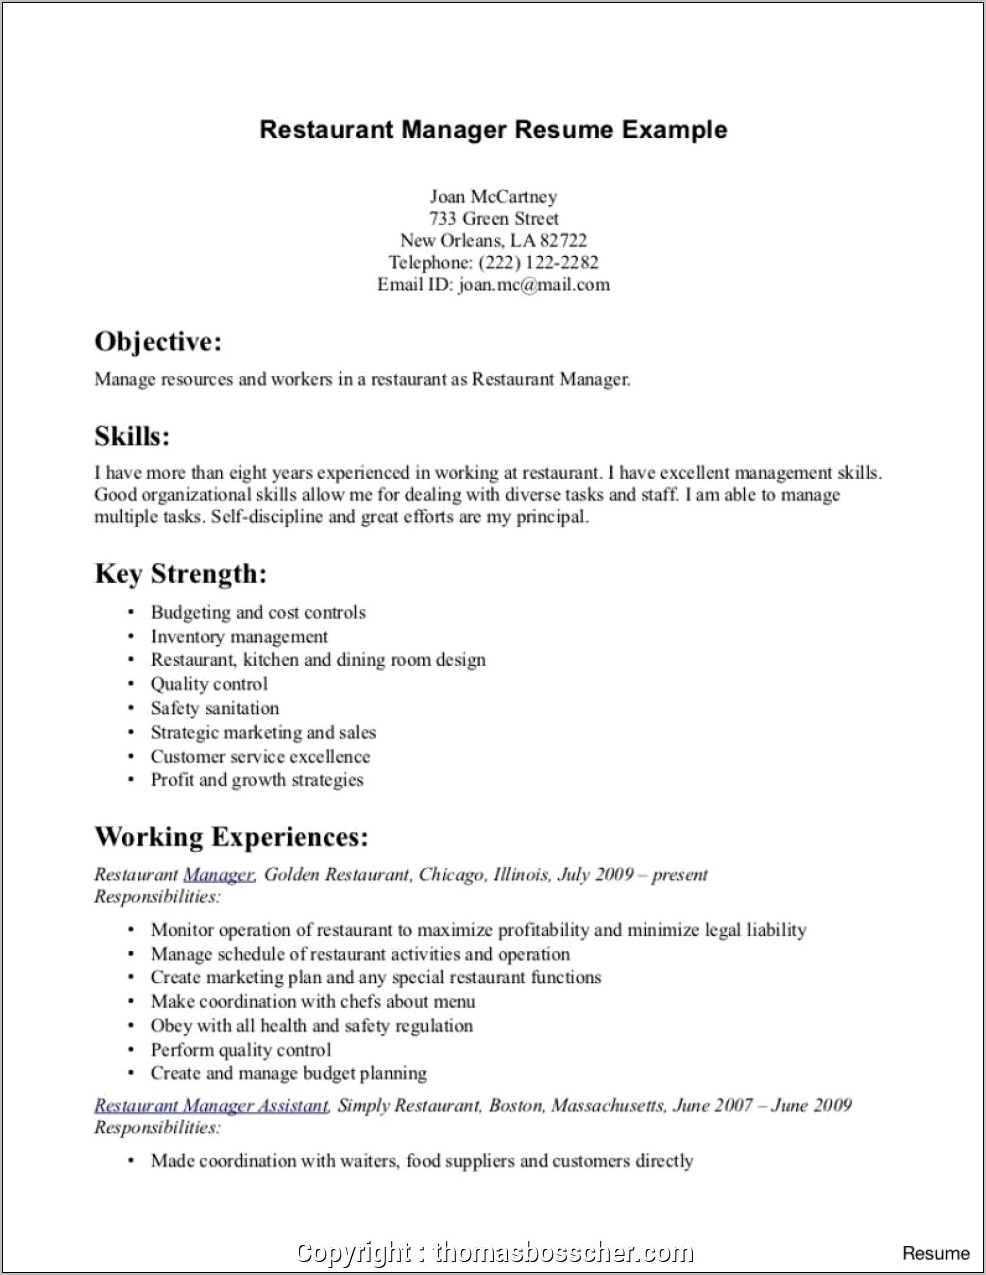 Skills From Serving Job To Include On Resume - Resume Example Gallery